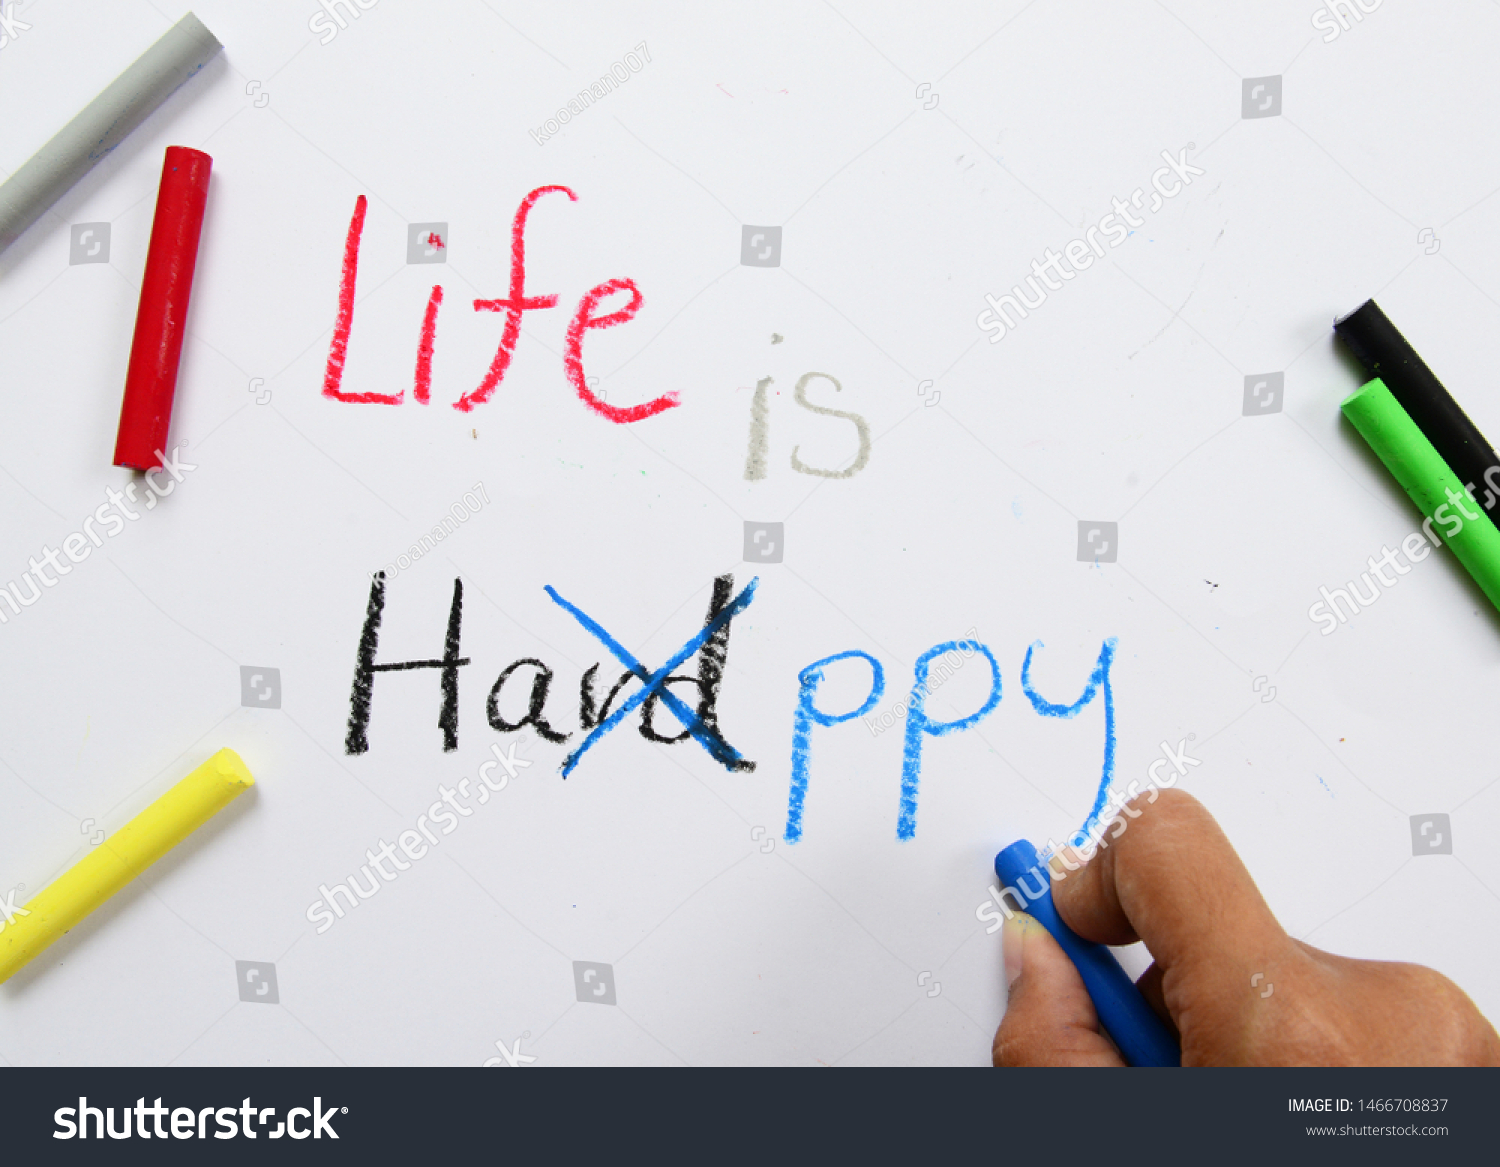 Life is Hard or Happy word, oil paint, writing, red, black, blue, child hand, motivational inspirational quotes words, words typography lettering concept for business, website, education and other. #1466708837